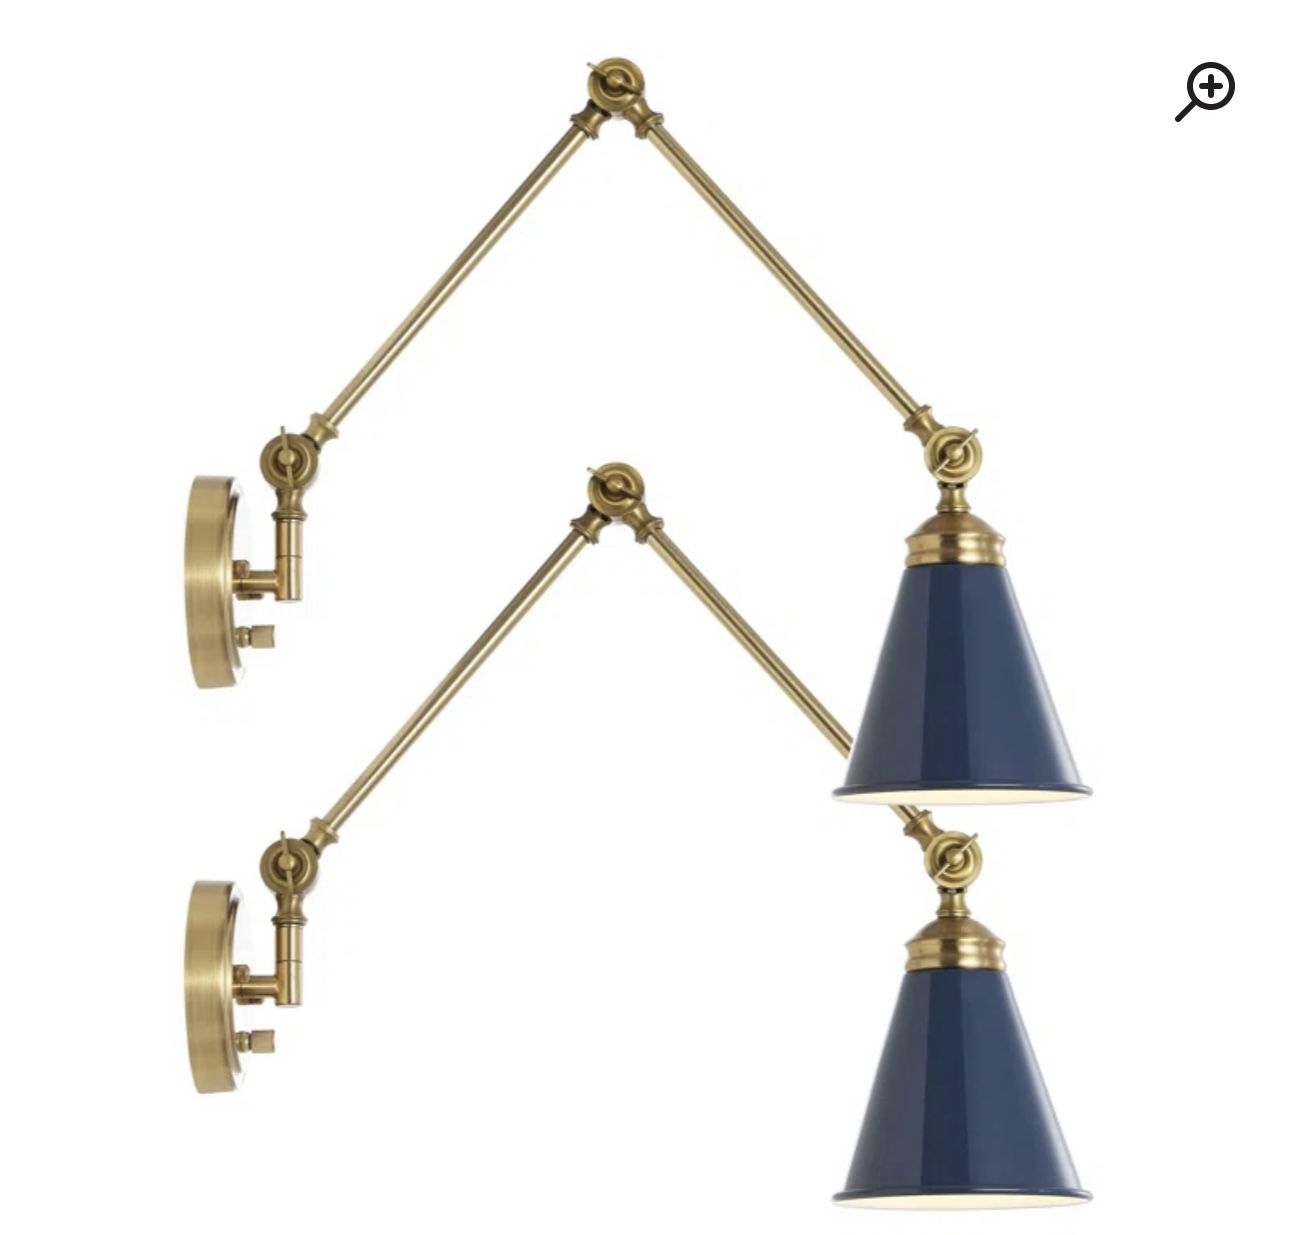 $95 EACH SET + sales tax - {TWO SETS} Cessna Iron Swing Arm Sconce (Set of 2) in gold and blue. 14'' H X 6.1'' W MSRP $160 EACH SET 